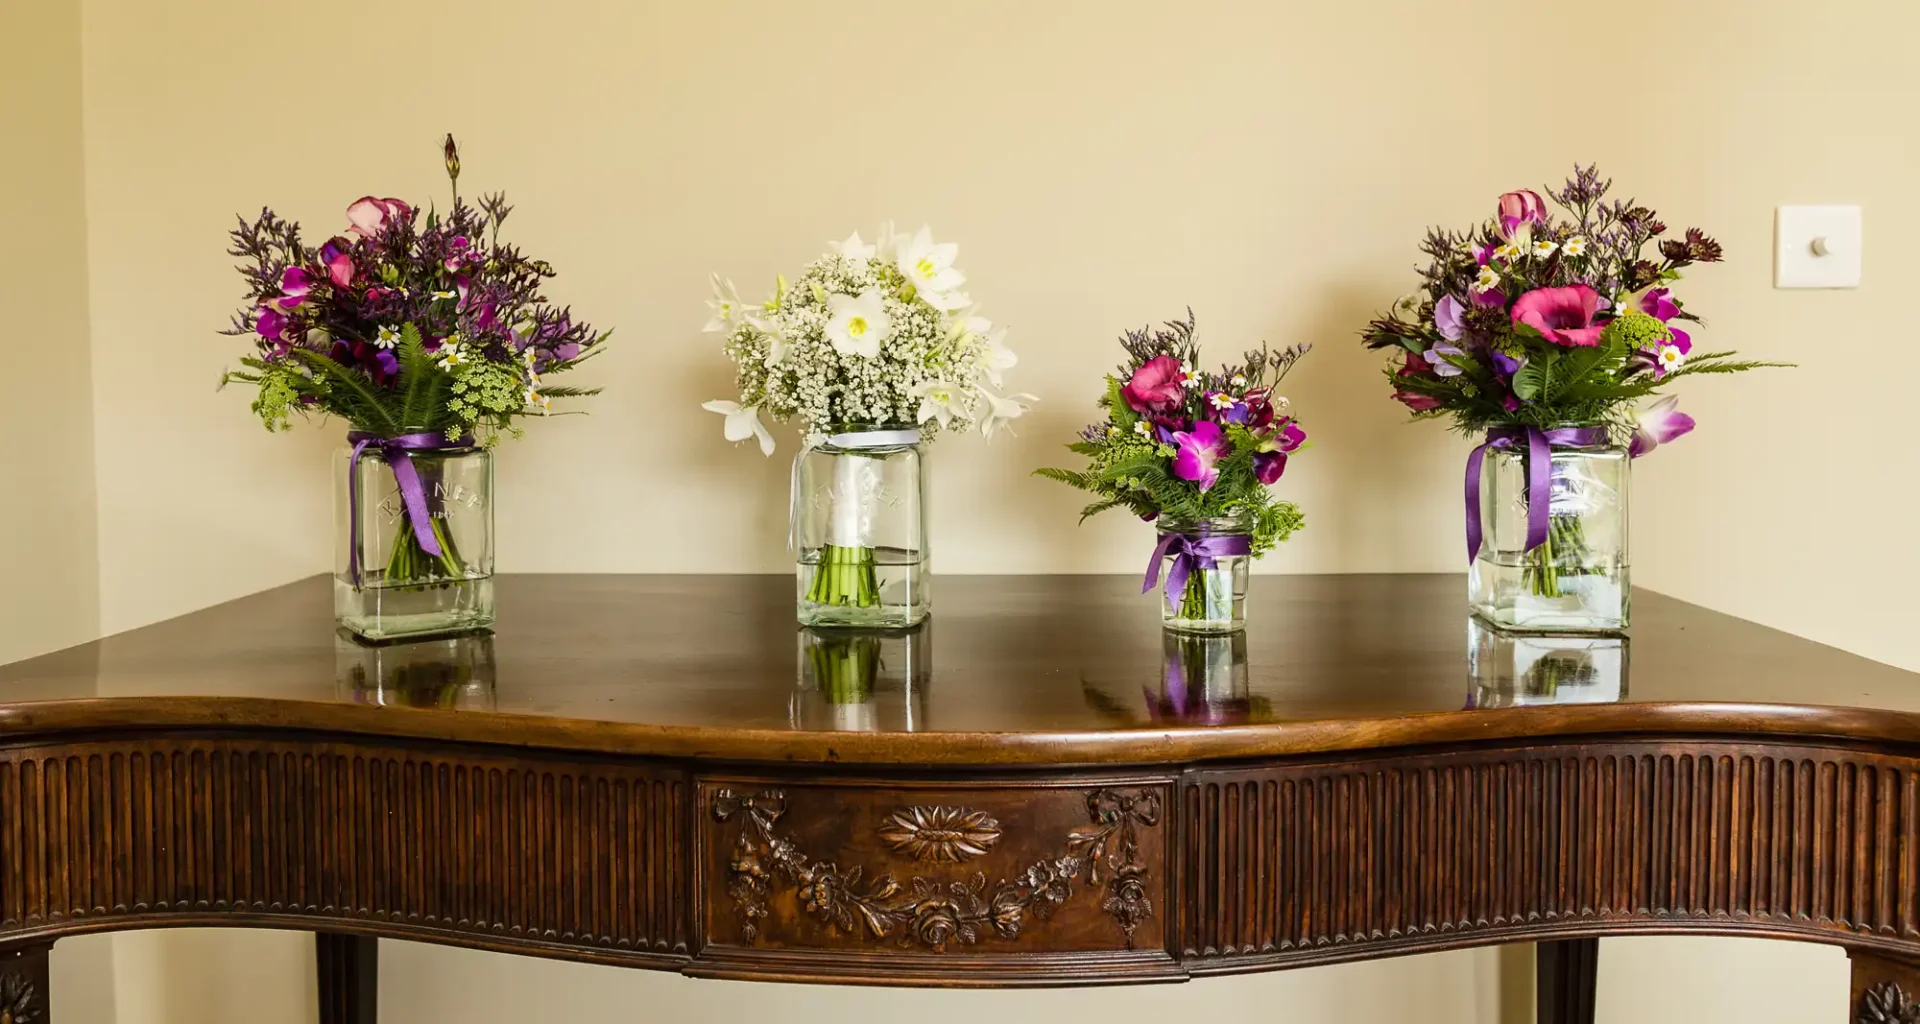 Three vases with mixed flowers, two with purple blooms and one with white, placed on a wooden table against a beige wall.